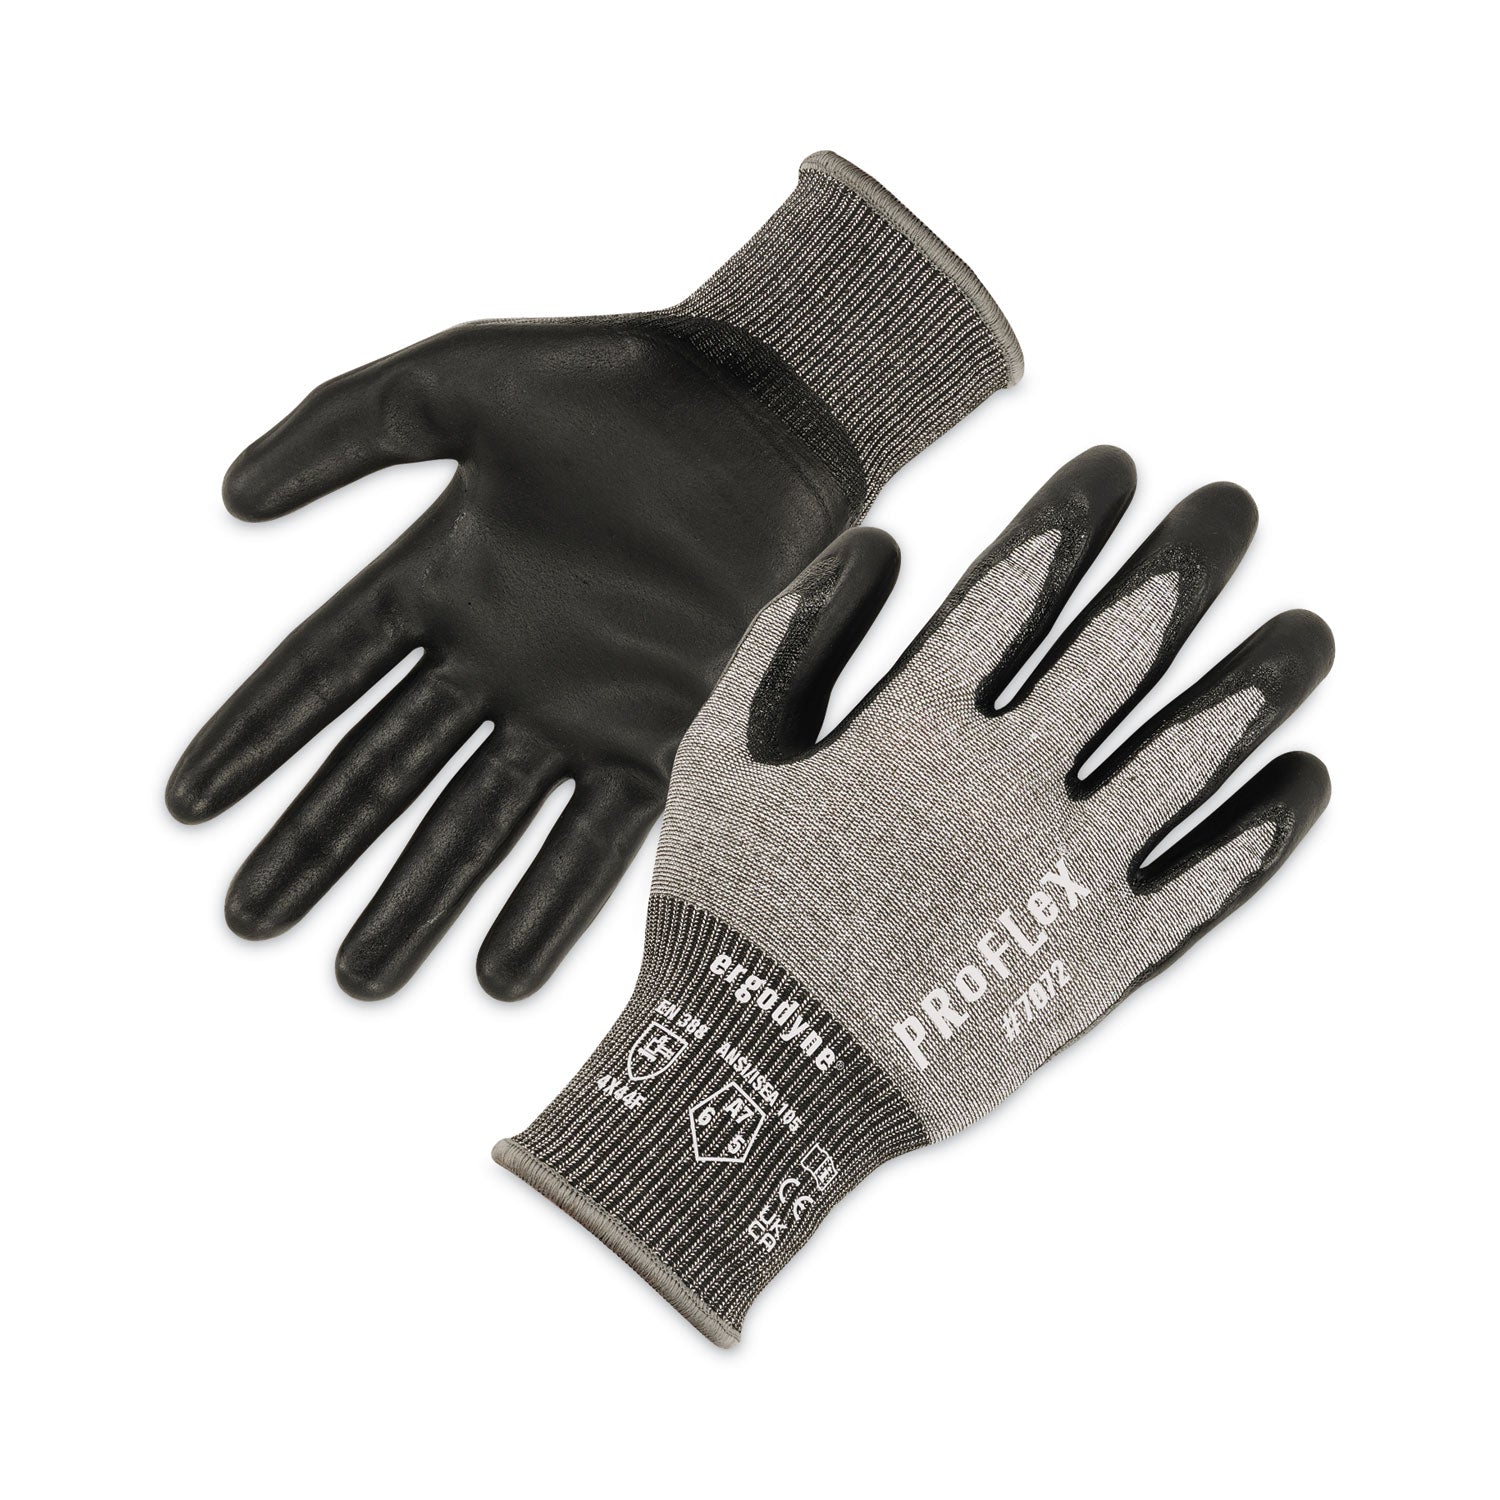 proflex-7072-ansi-a7-nitrile-coated-cr-gloves-gray-large-12-pairs-pack-ships-in-1-3-business-days_ego10304 - 1